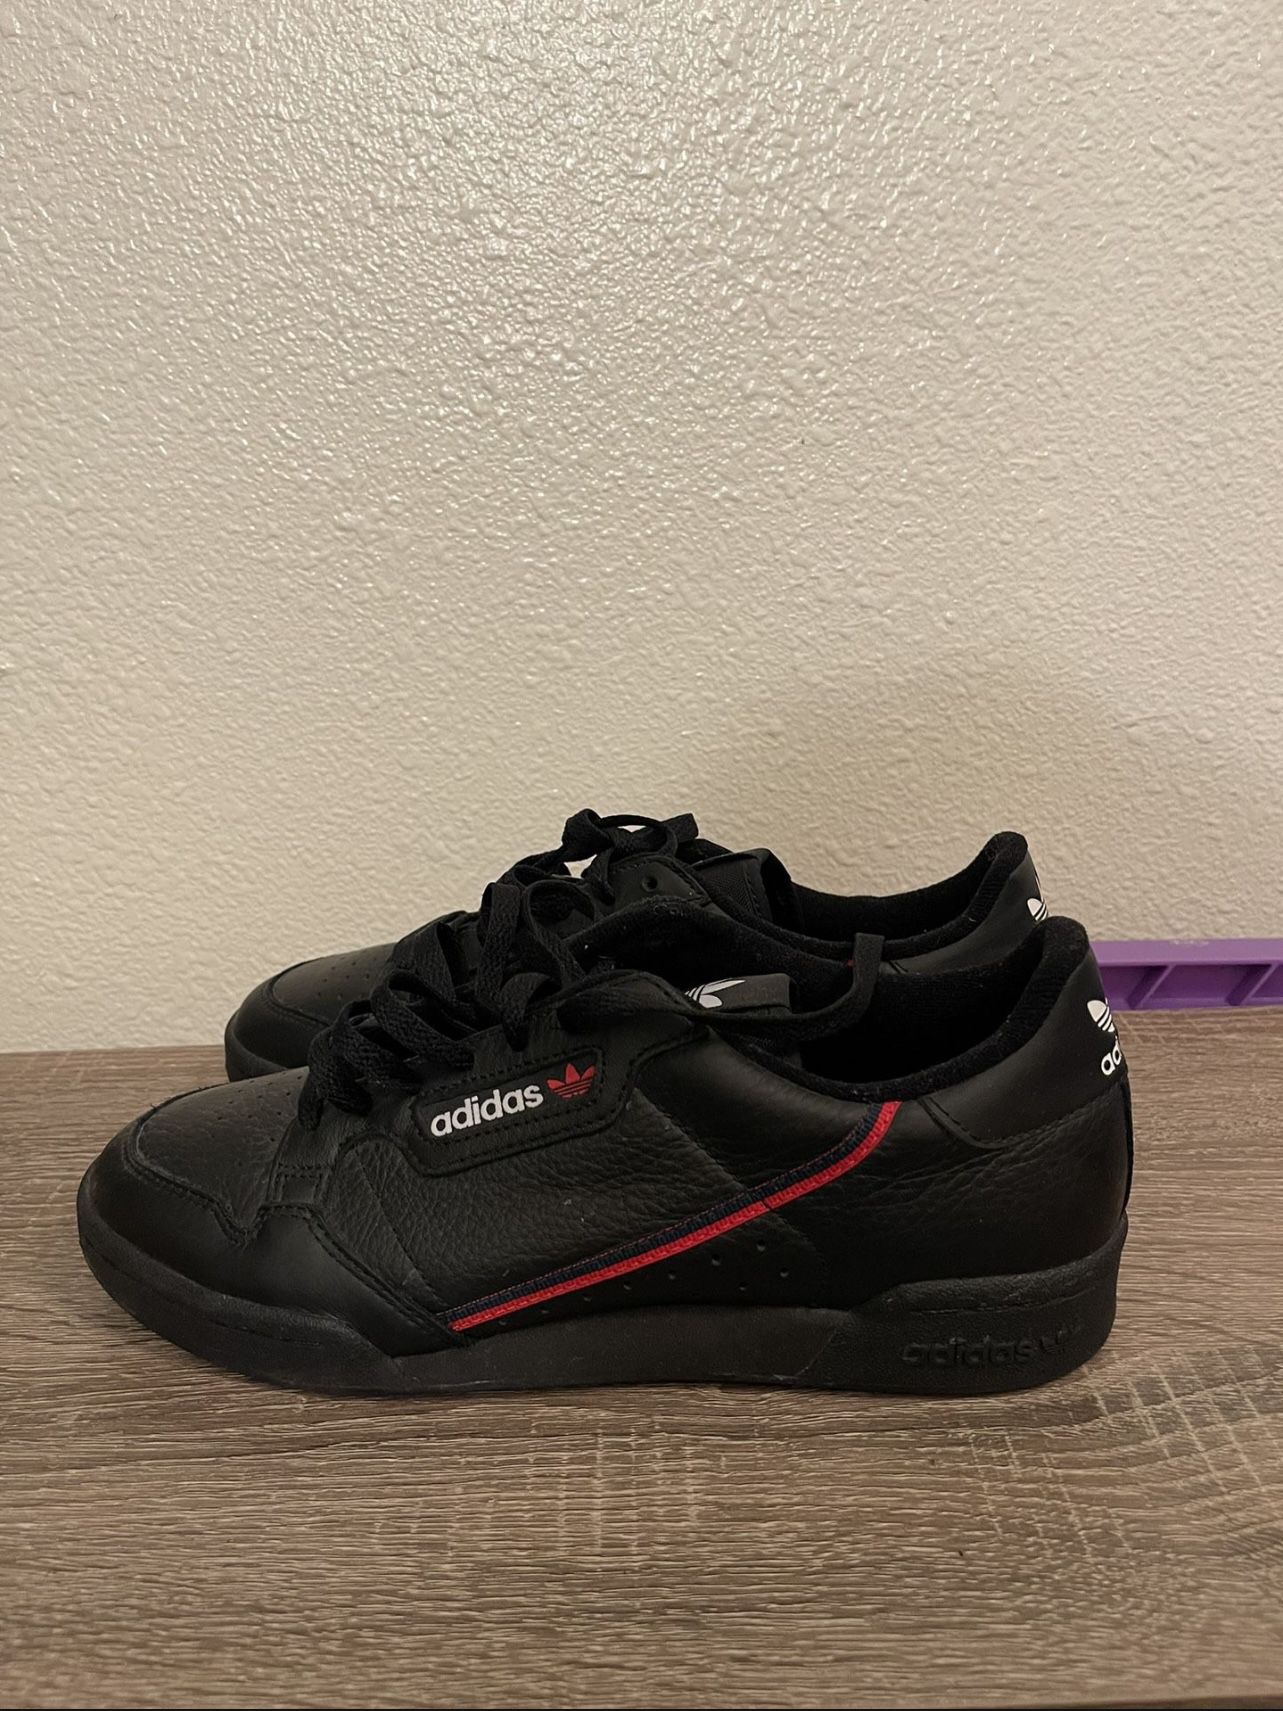 Men's Adidas Continental 80 Rascal 'Core Black' for in Ontario, CA - OfferUp